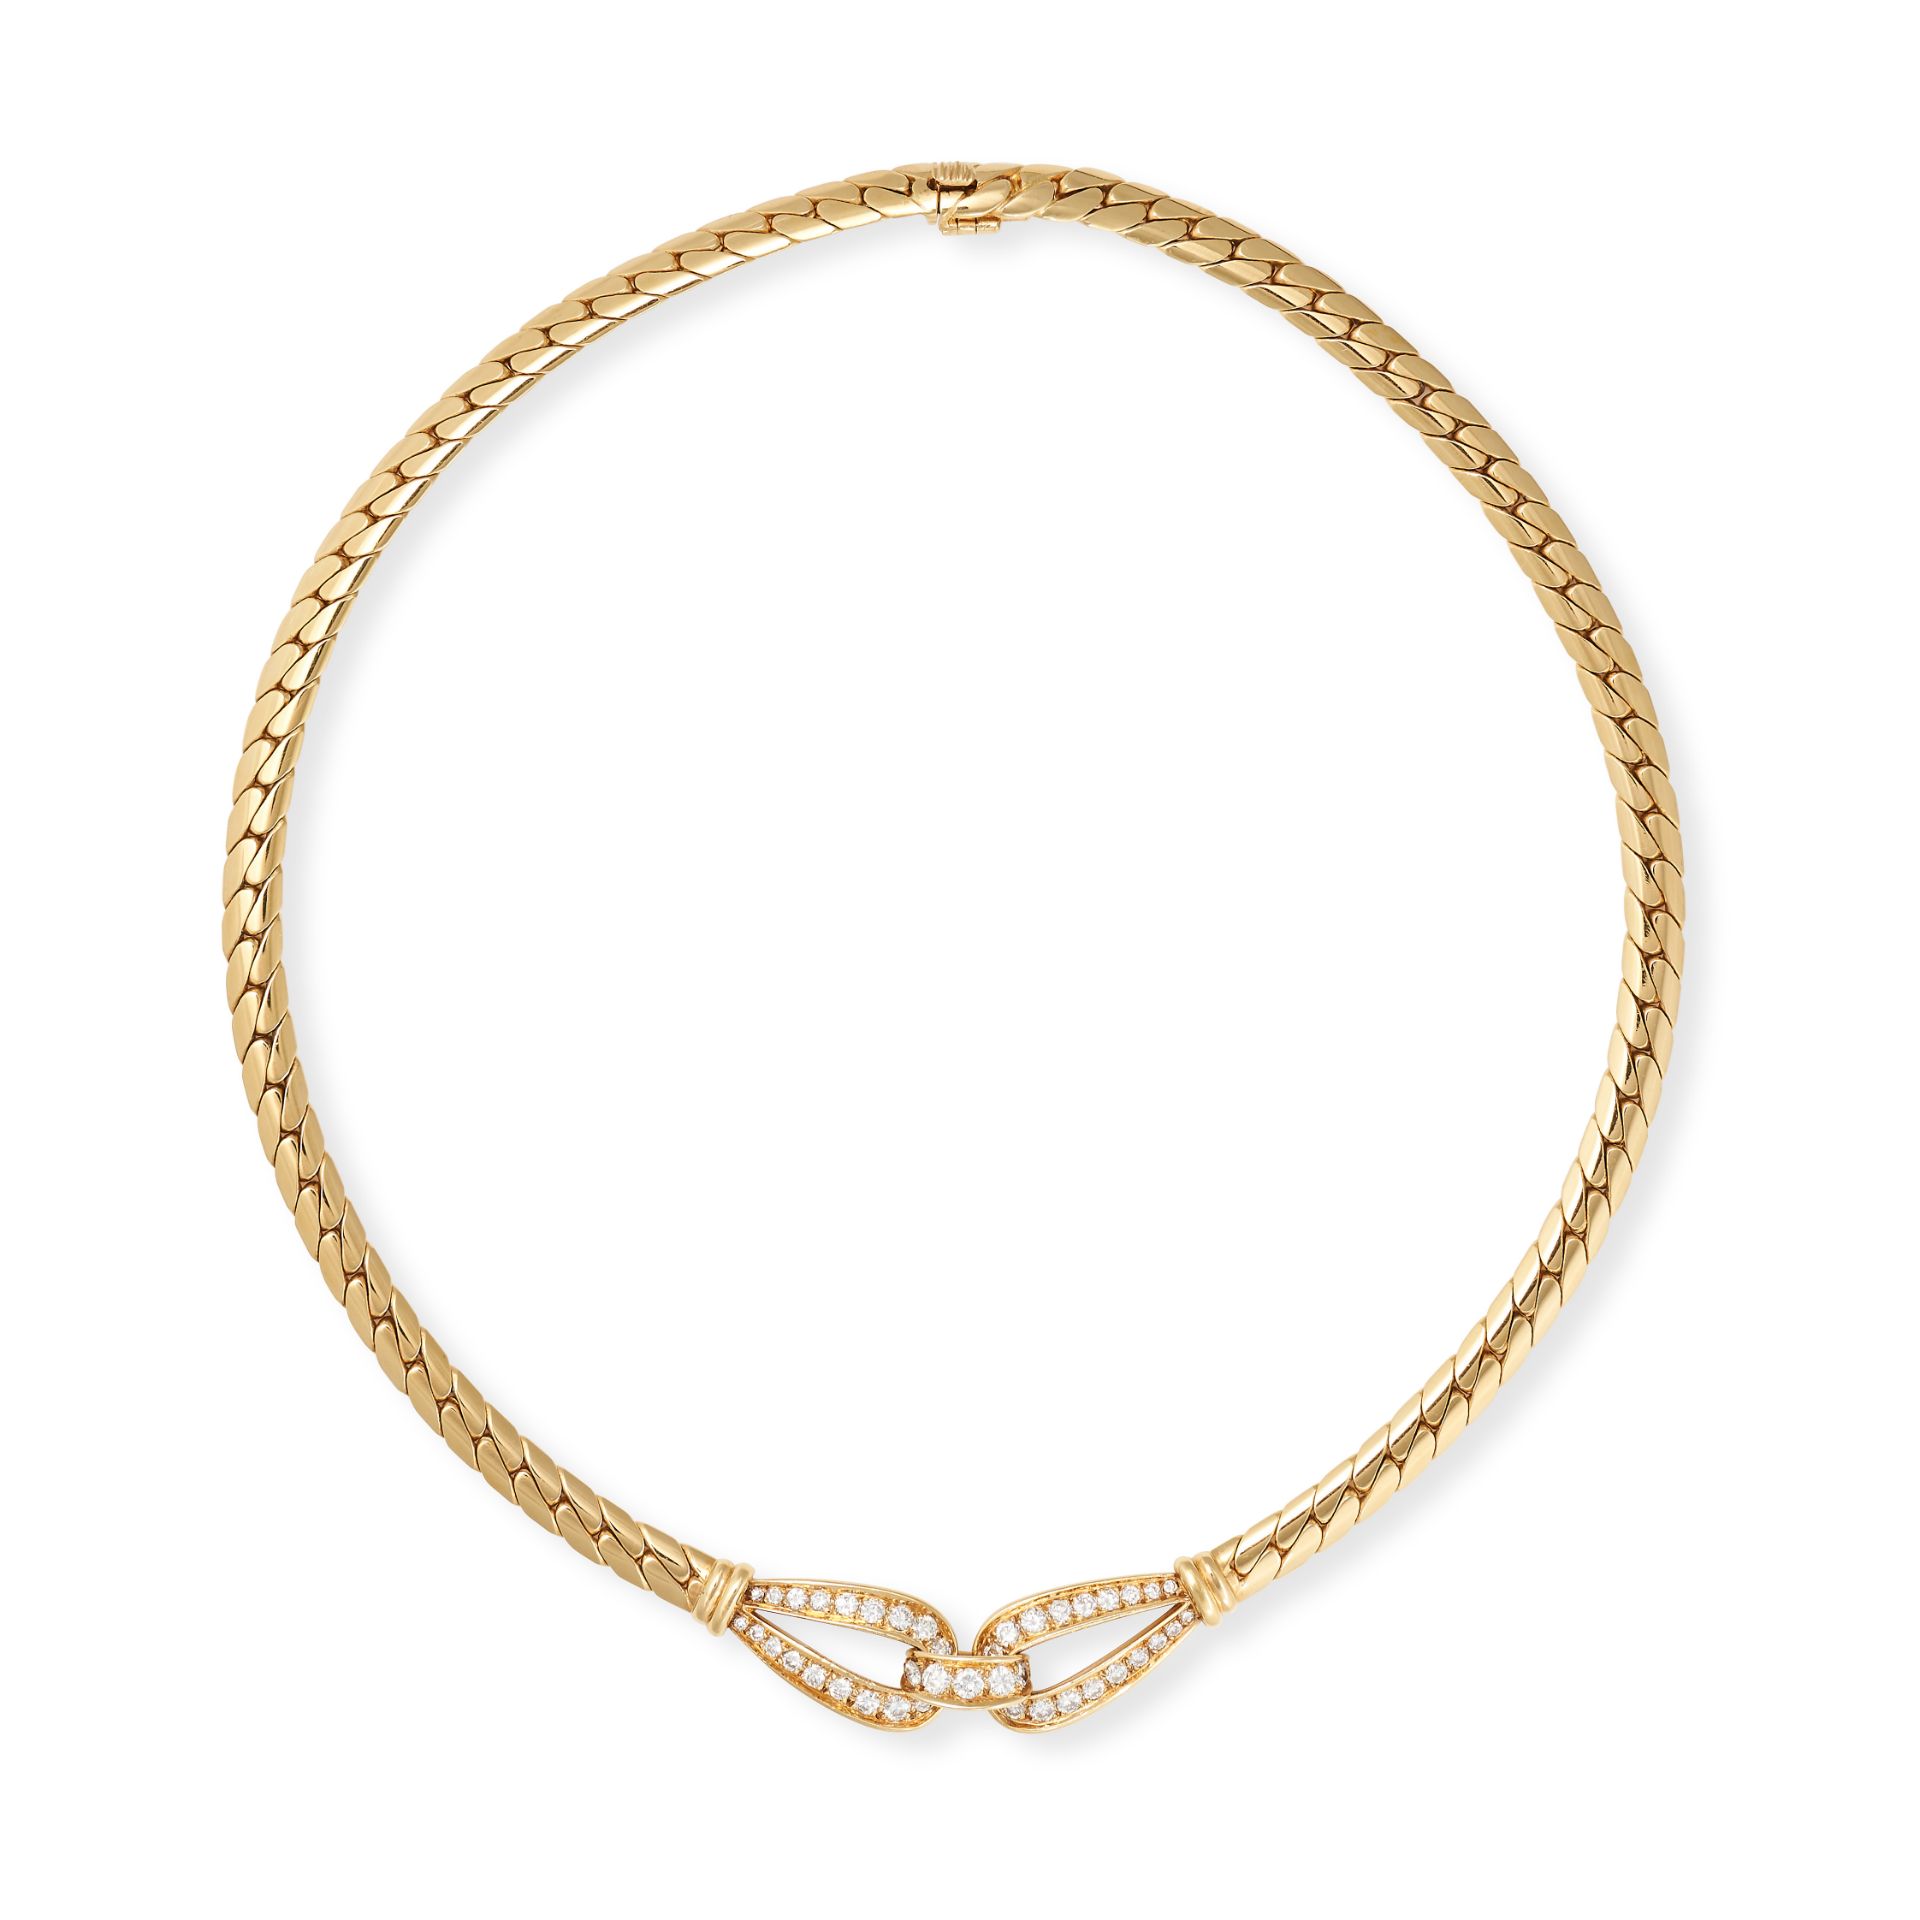 GEORGES L'ENFANT FOR CARTIER, A DIAMOND NECKLACE in 18ct yellow gold, comprising a flat link chai...